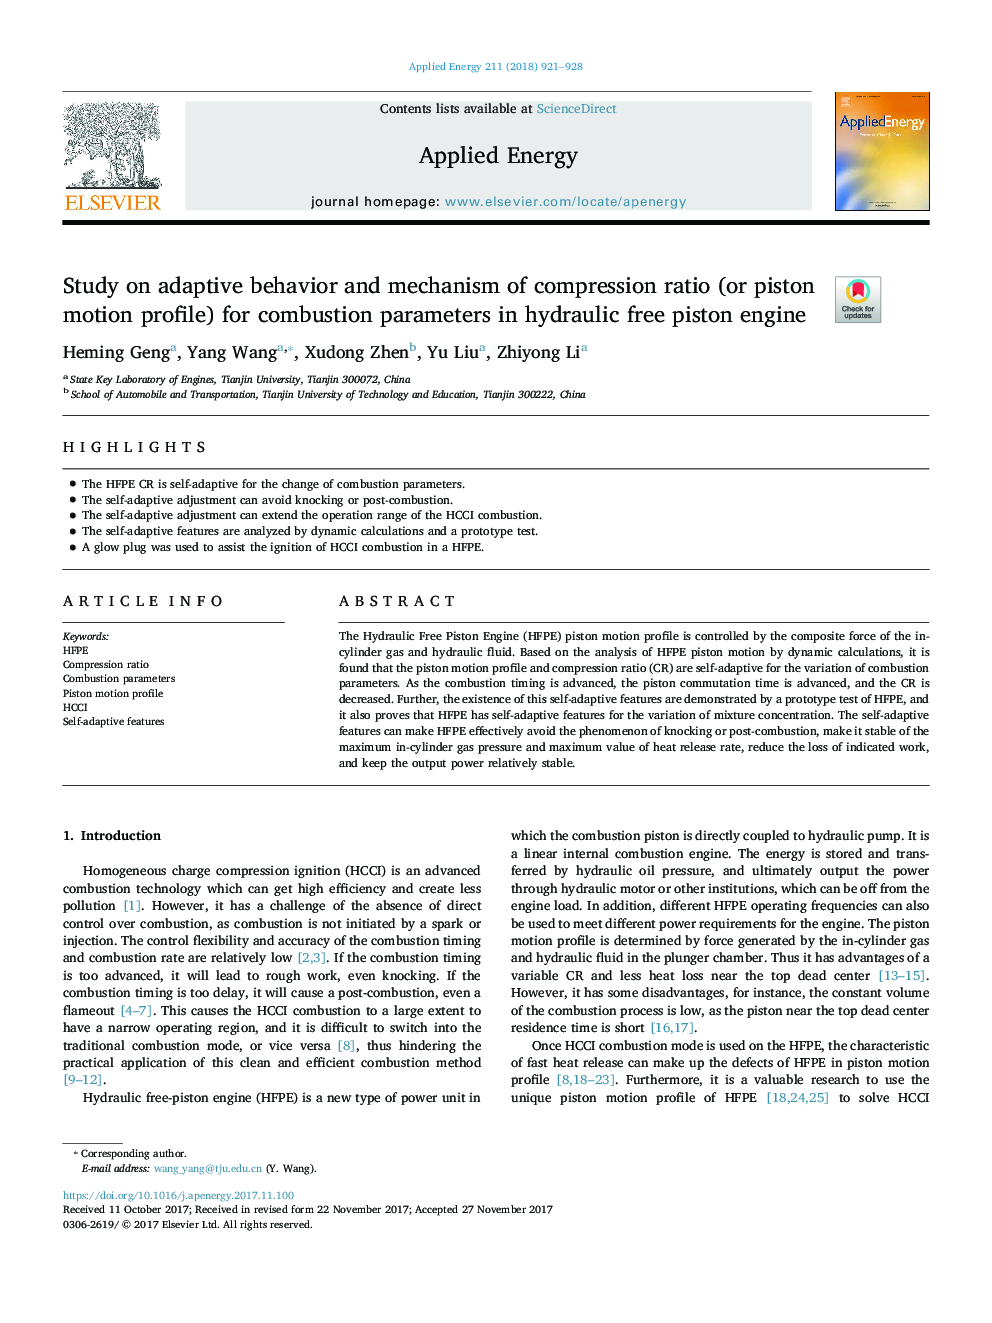 Study on adaptive behavior and mechanism of compression ratio (or piston motion profile) for combustion parameters in hydraulic free piston engine